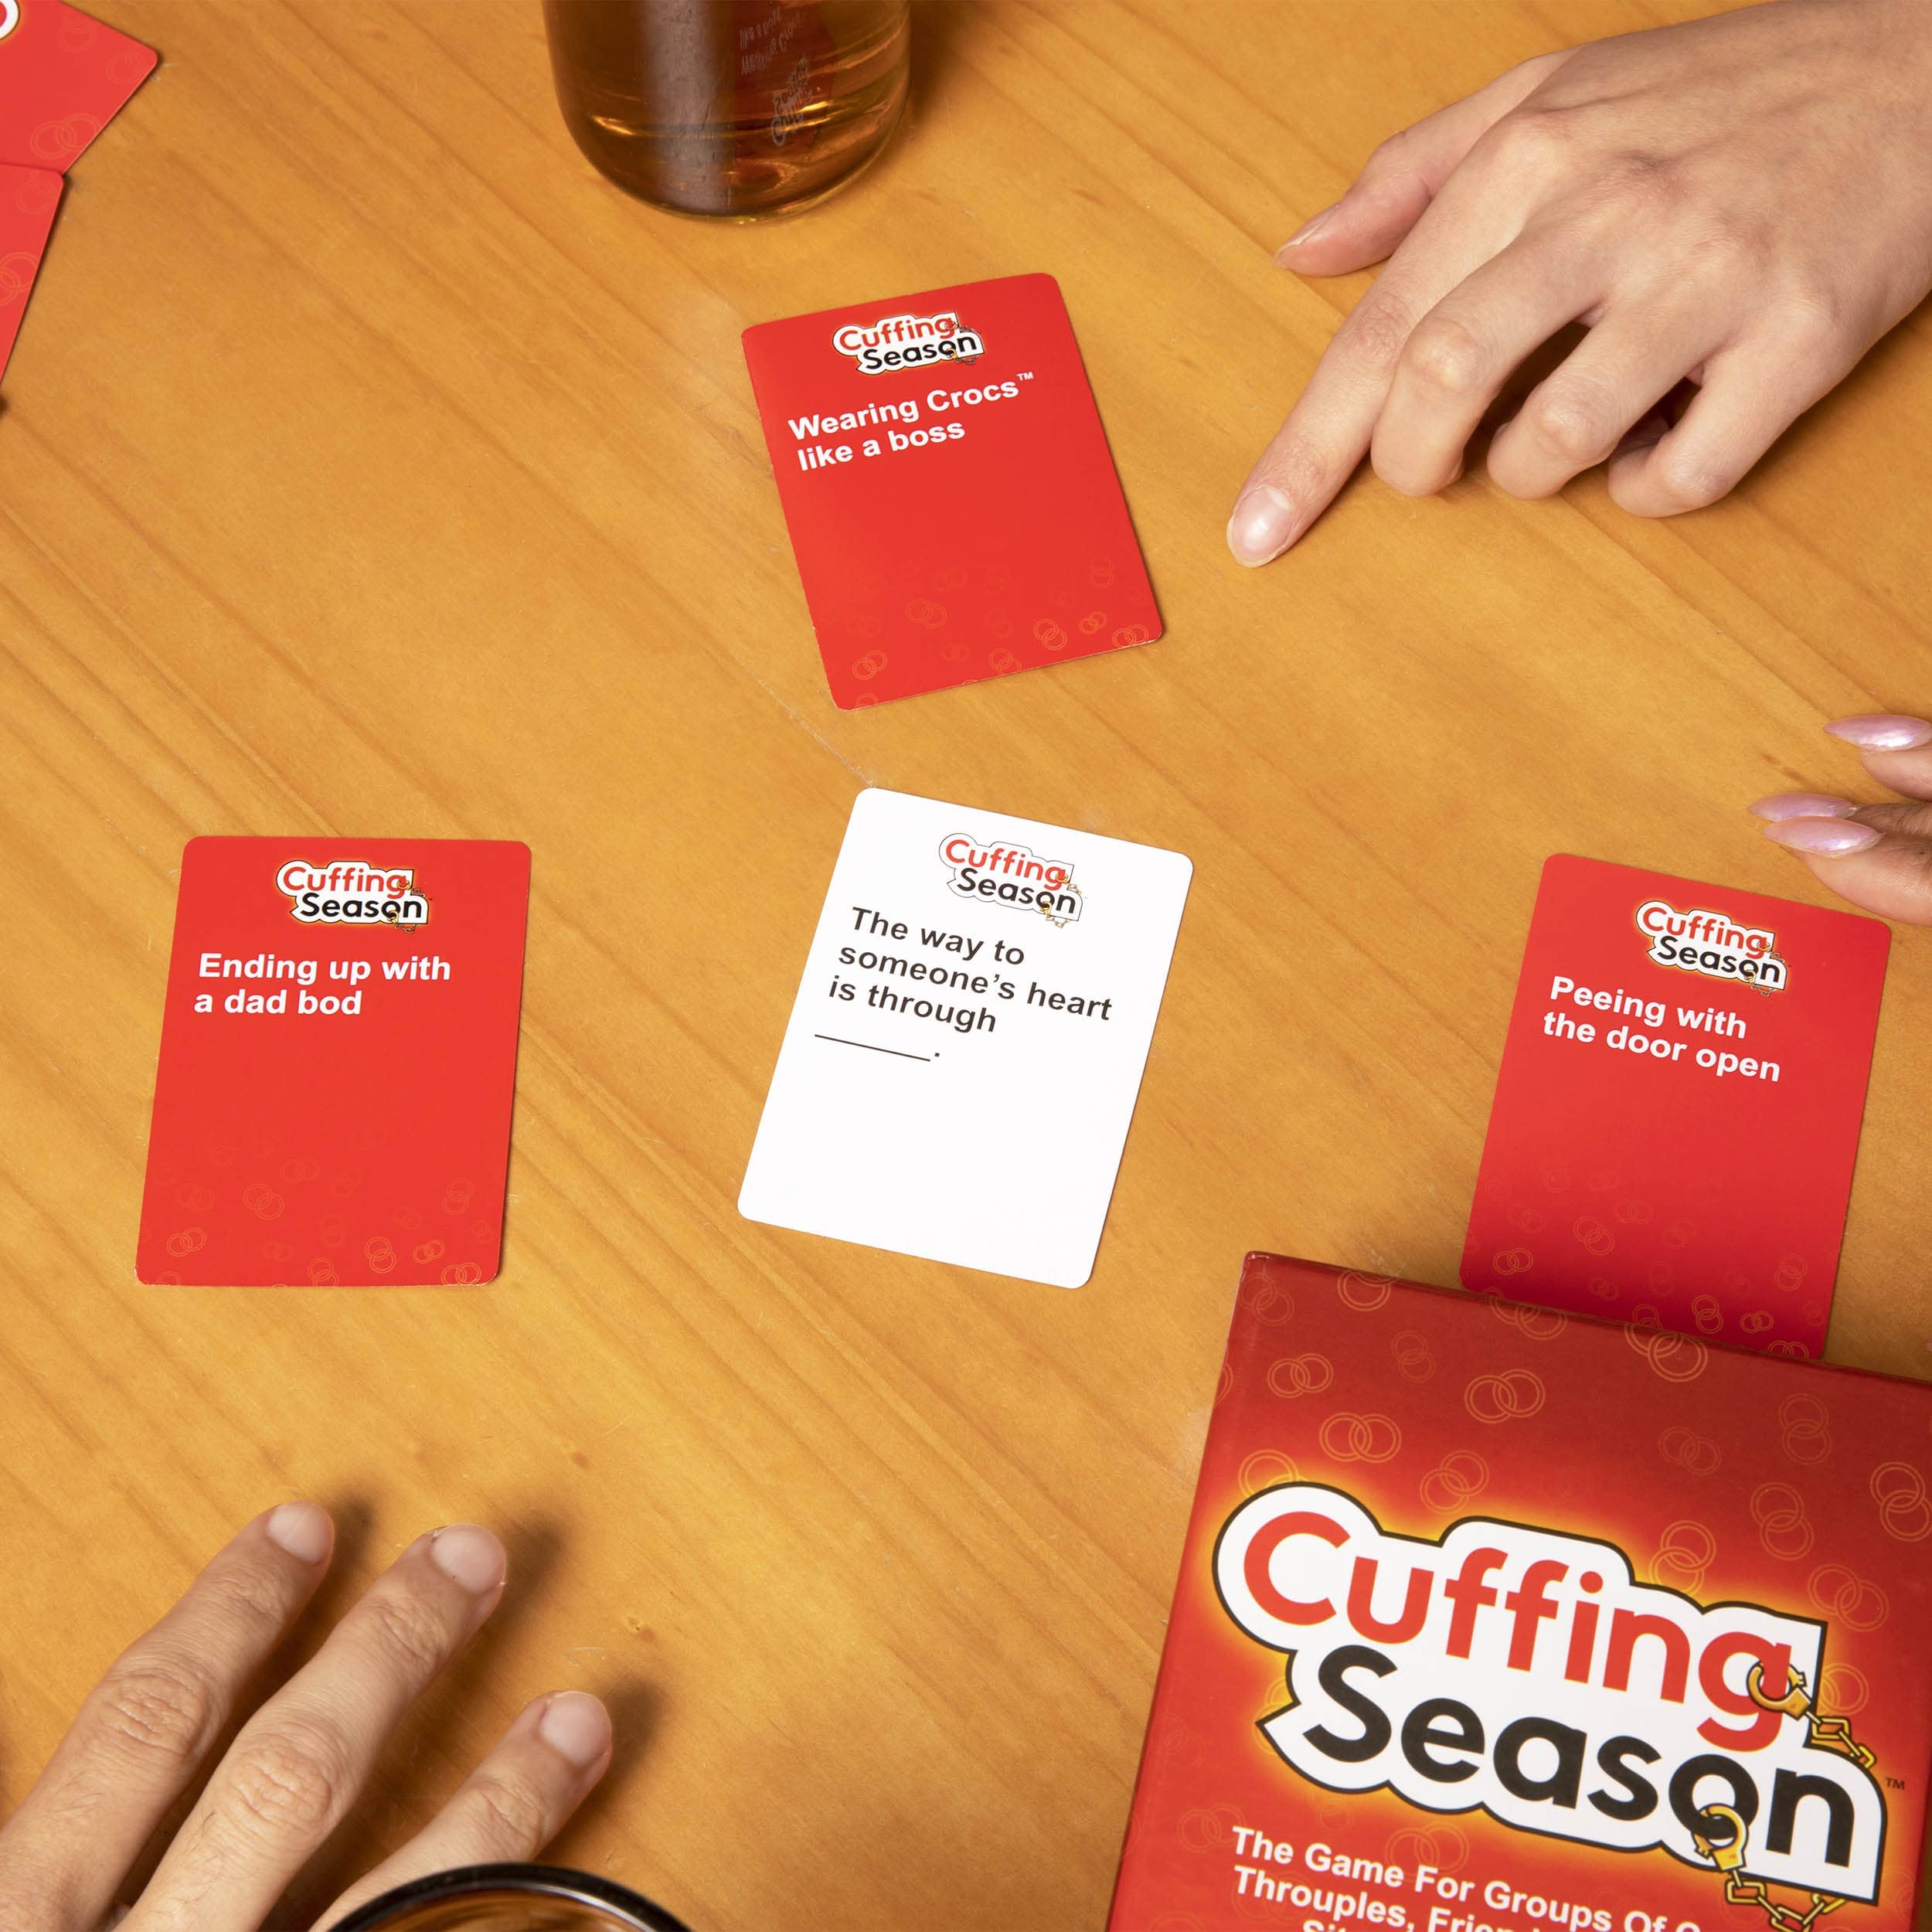 WHAT DO YOU MEME? Cuffing Season – The Party Game for Groups of Couples, Throuples, Friends with Benefits, Situationships, Partners, Spouses and More